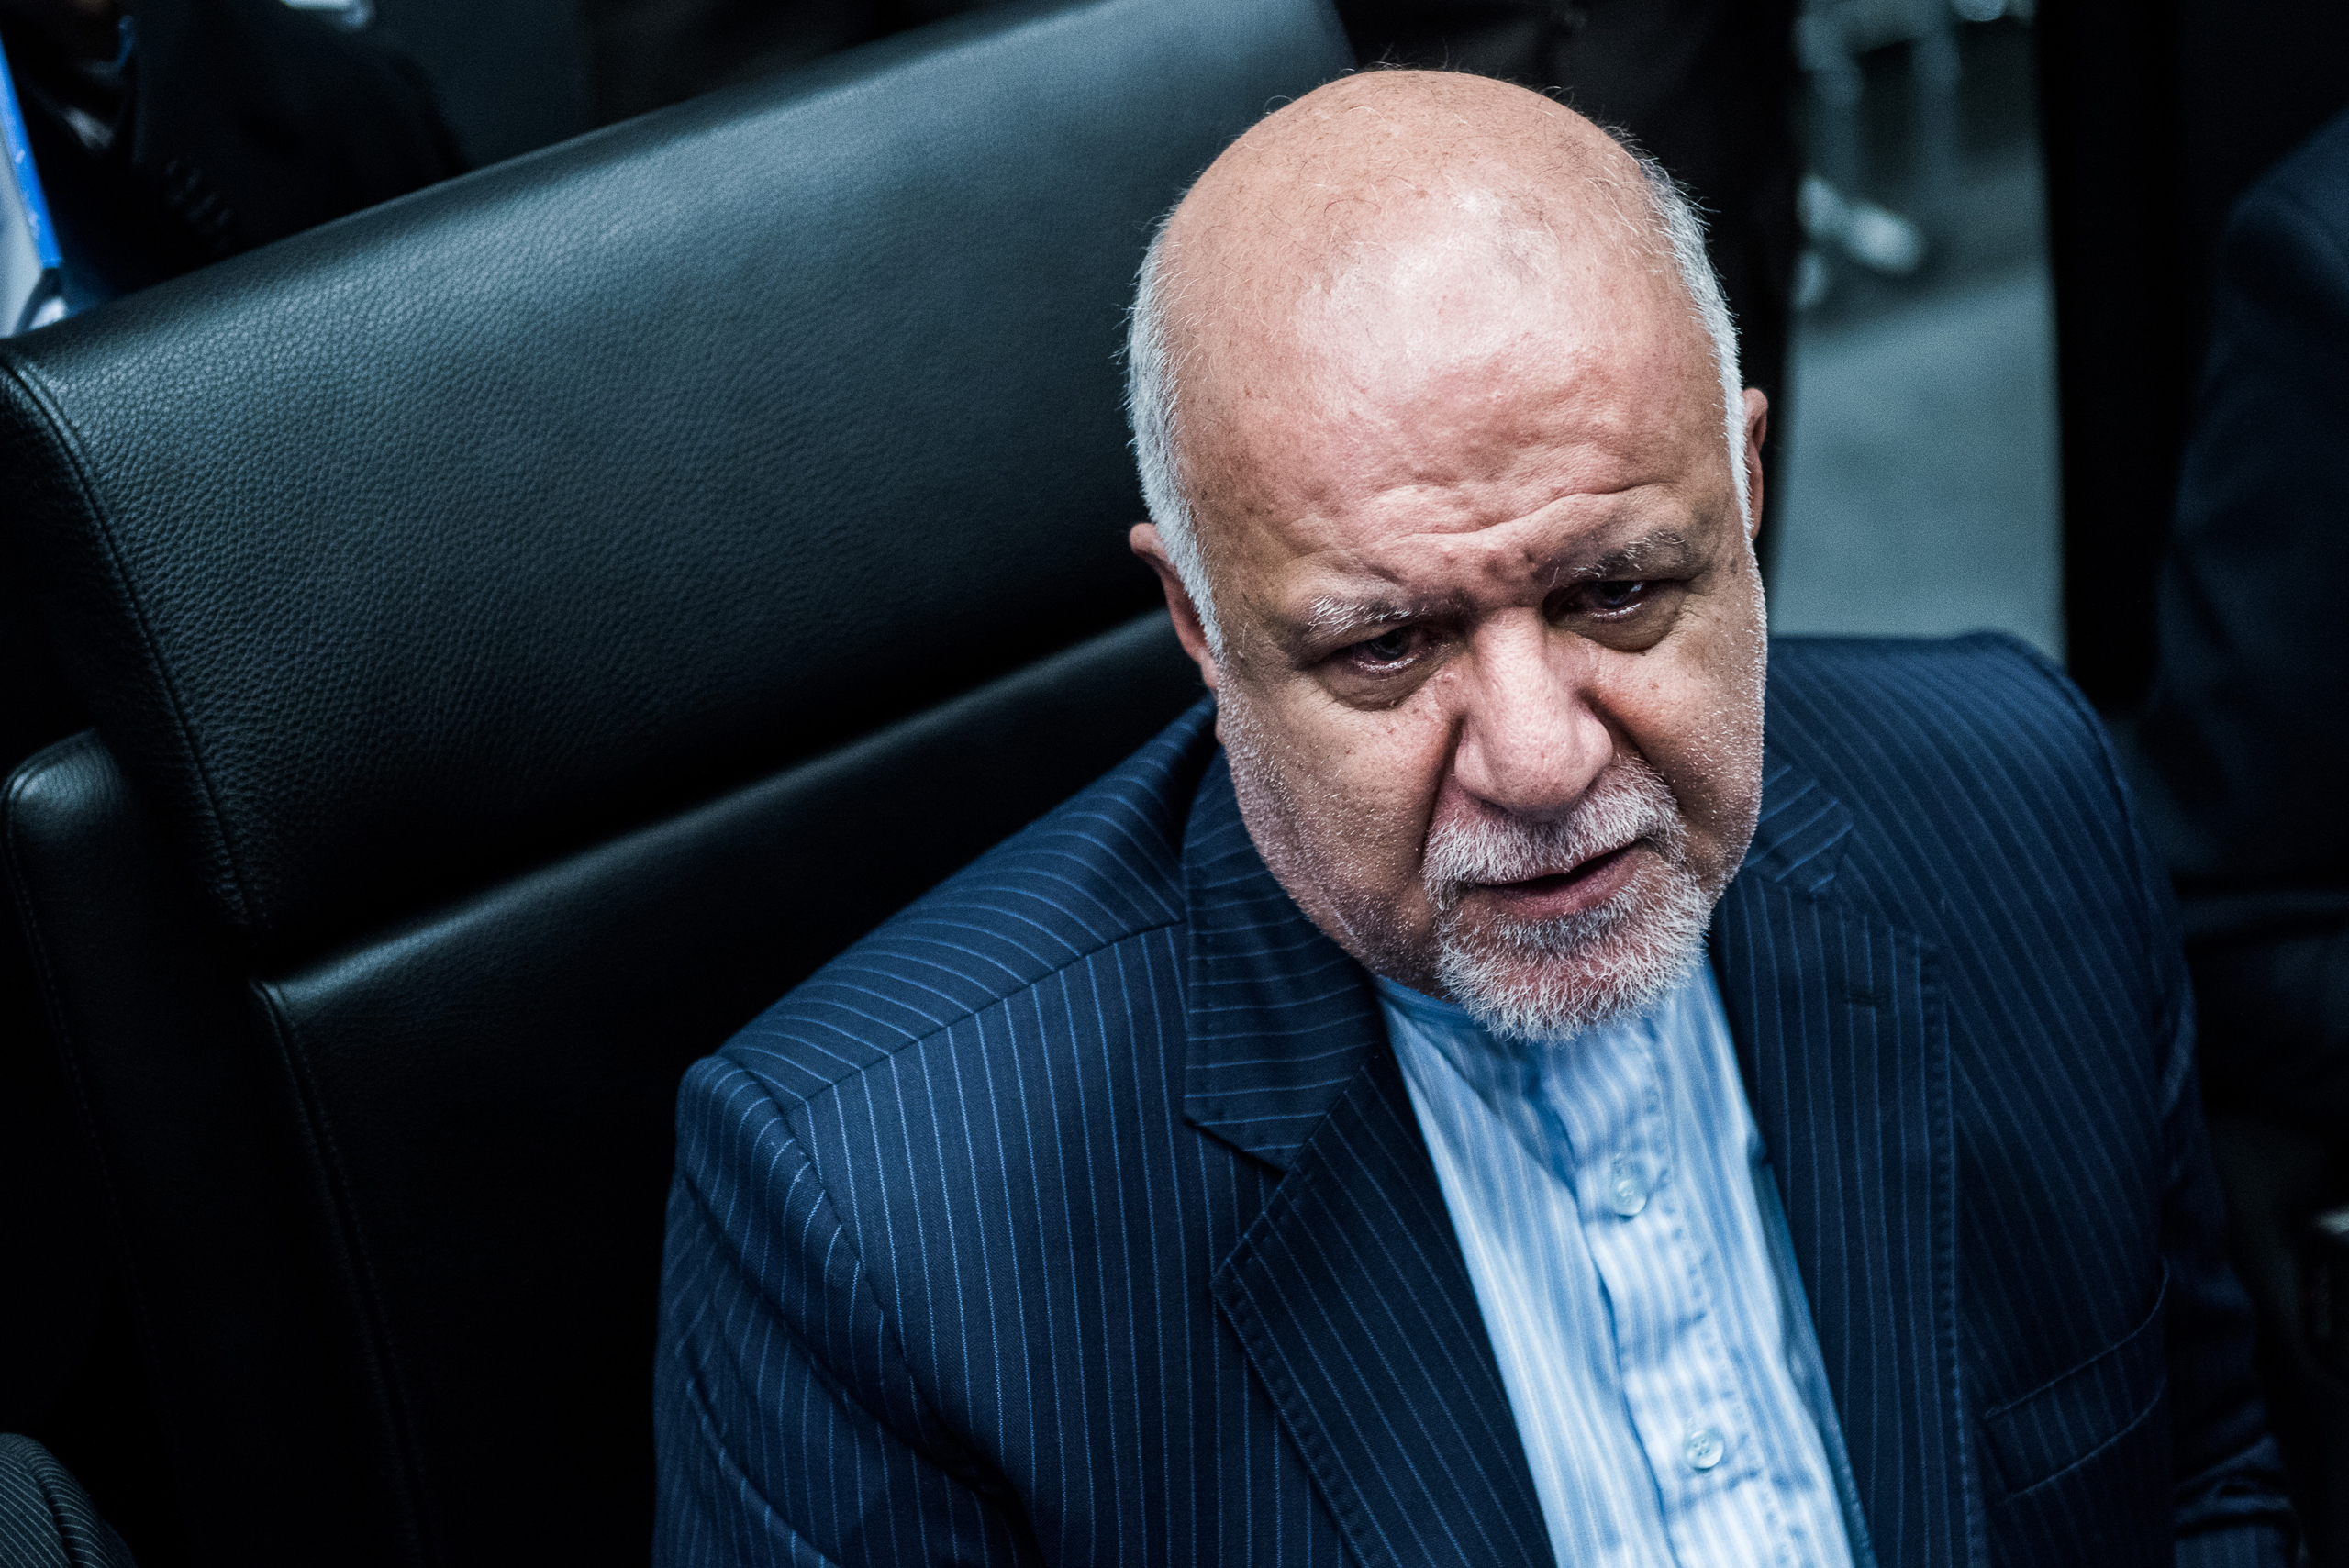 Bijan Namdar Zanganeh, Iran's petroleum minister, looks on ahead of the 169th Organization of Petroleum Exporting Countries (OPEC) meeting in Vienna, Austria, on June 2, 2016. (Bloomberg/Getty Images)